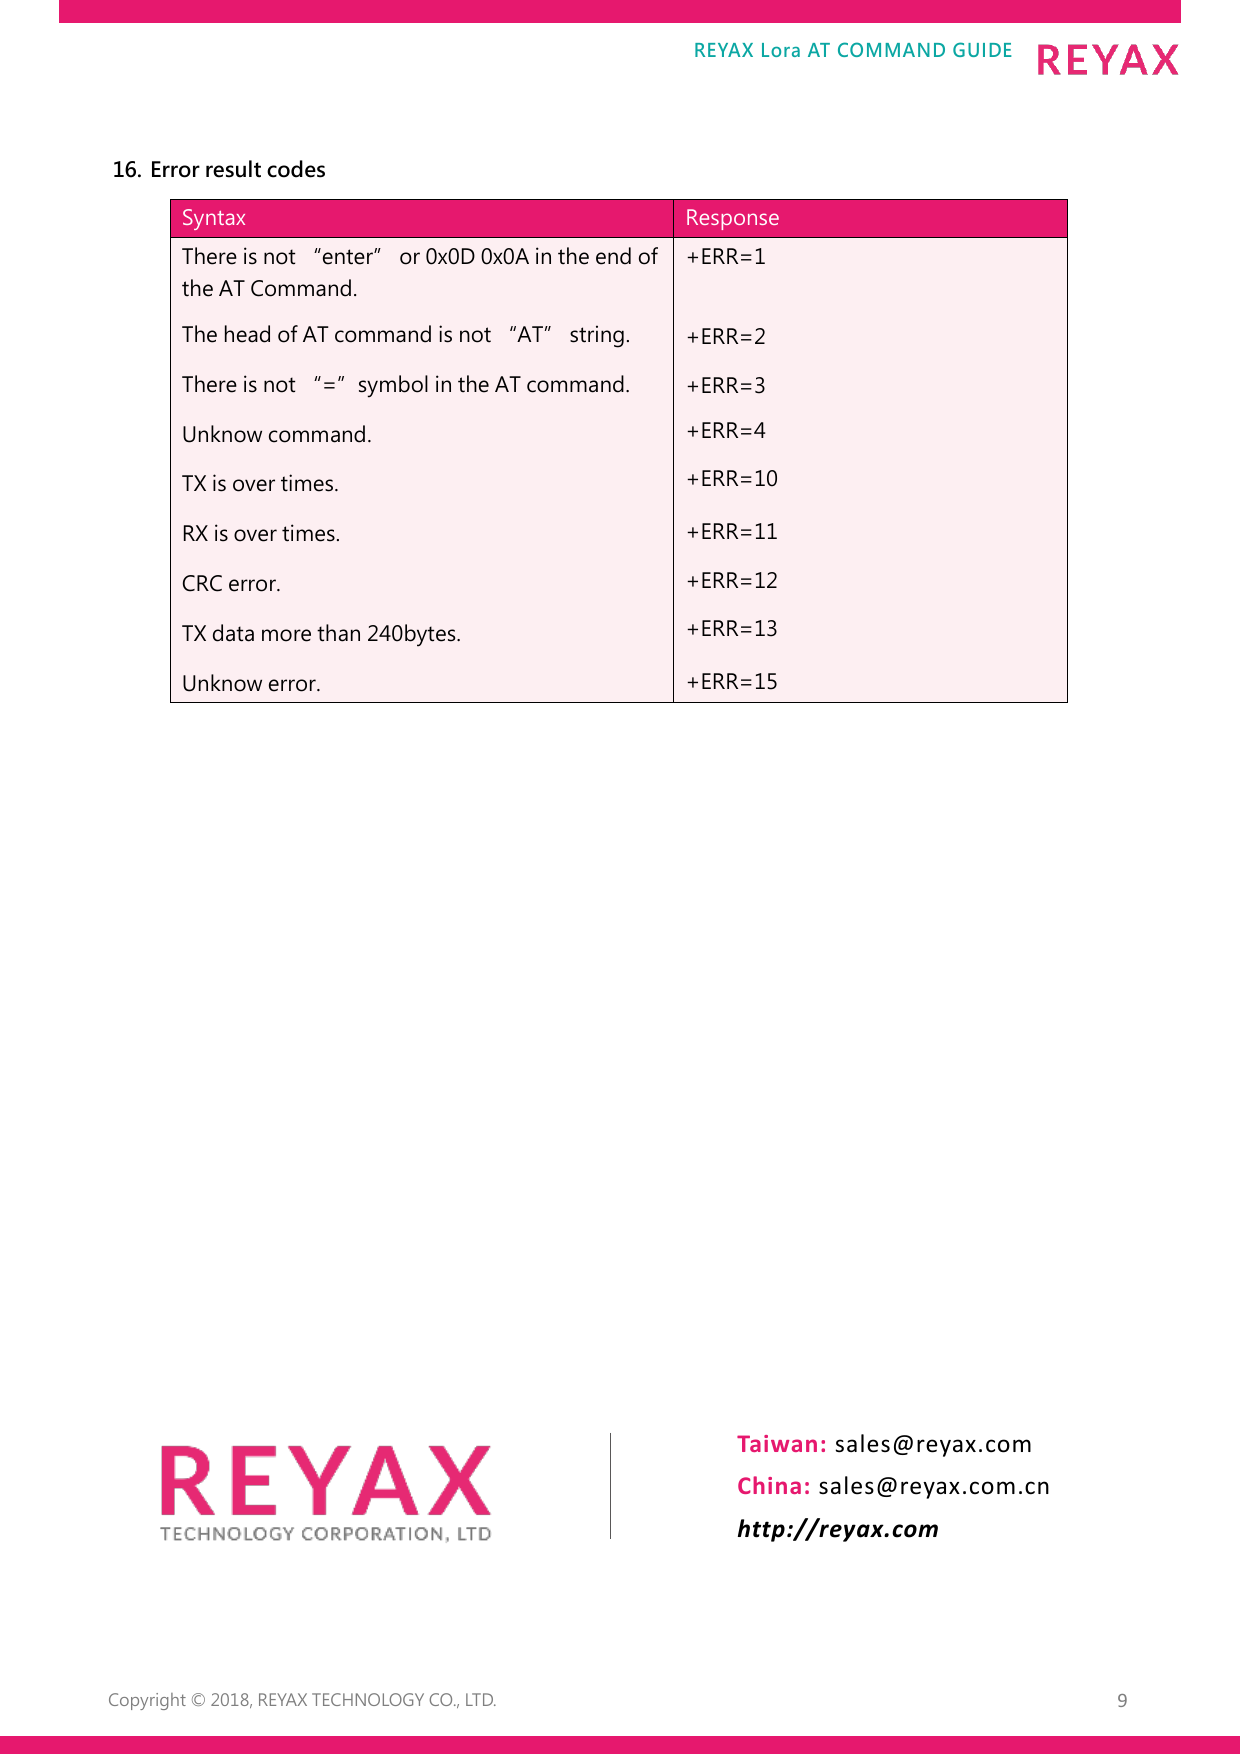 Page 9 of 9 - REYAX-Lora AT COMMAND GUIDE EN